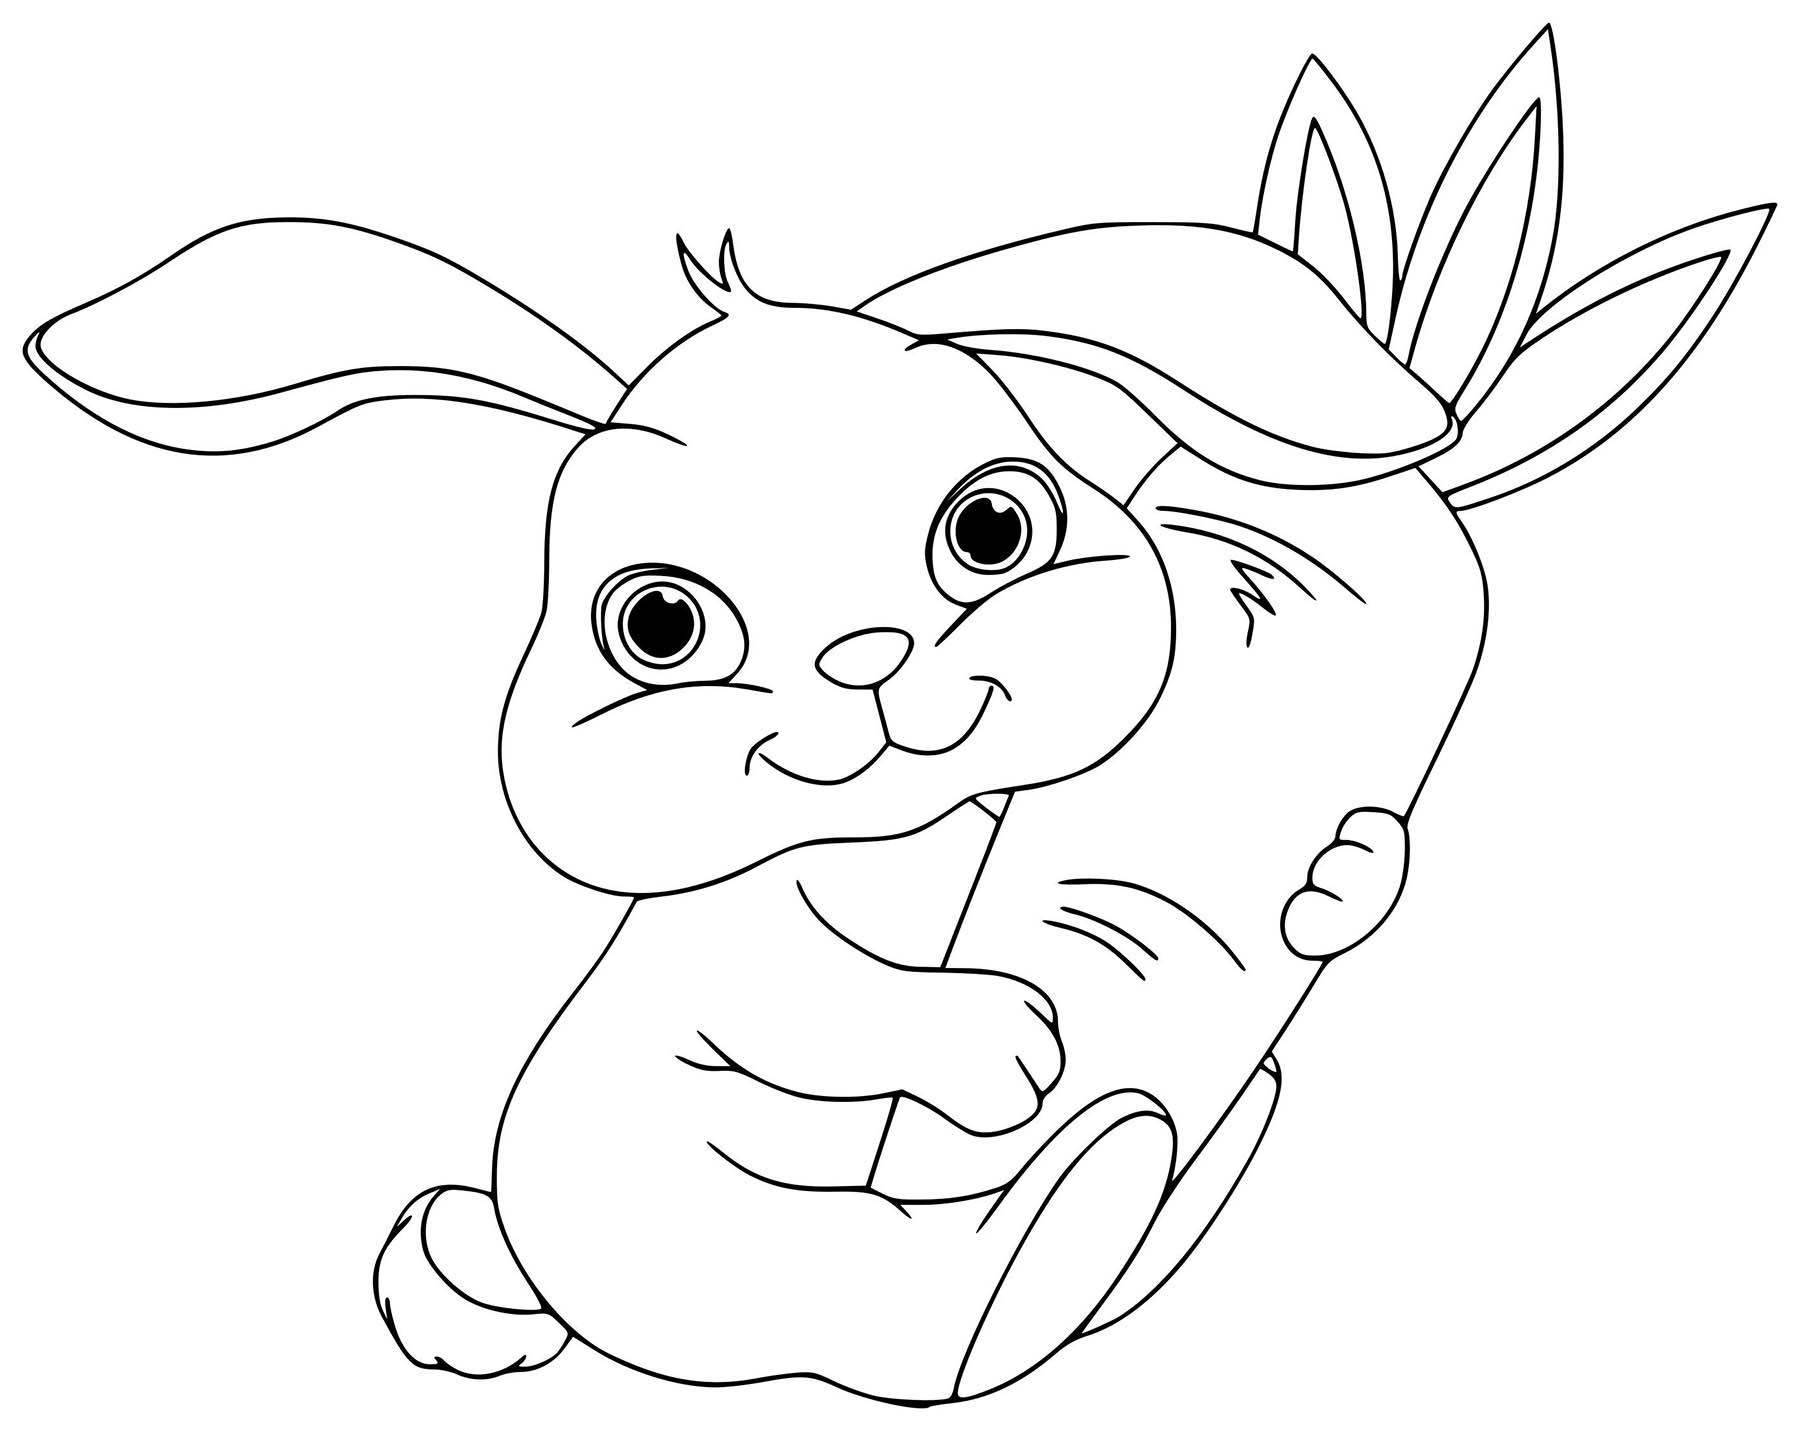 rabbit-coloring-page